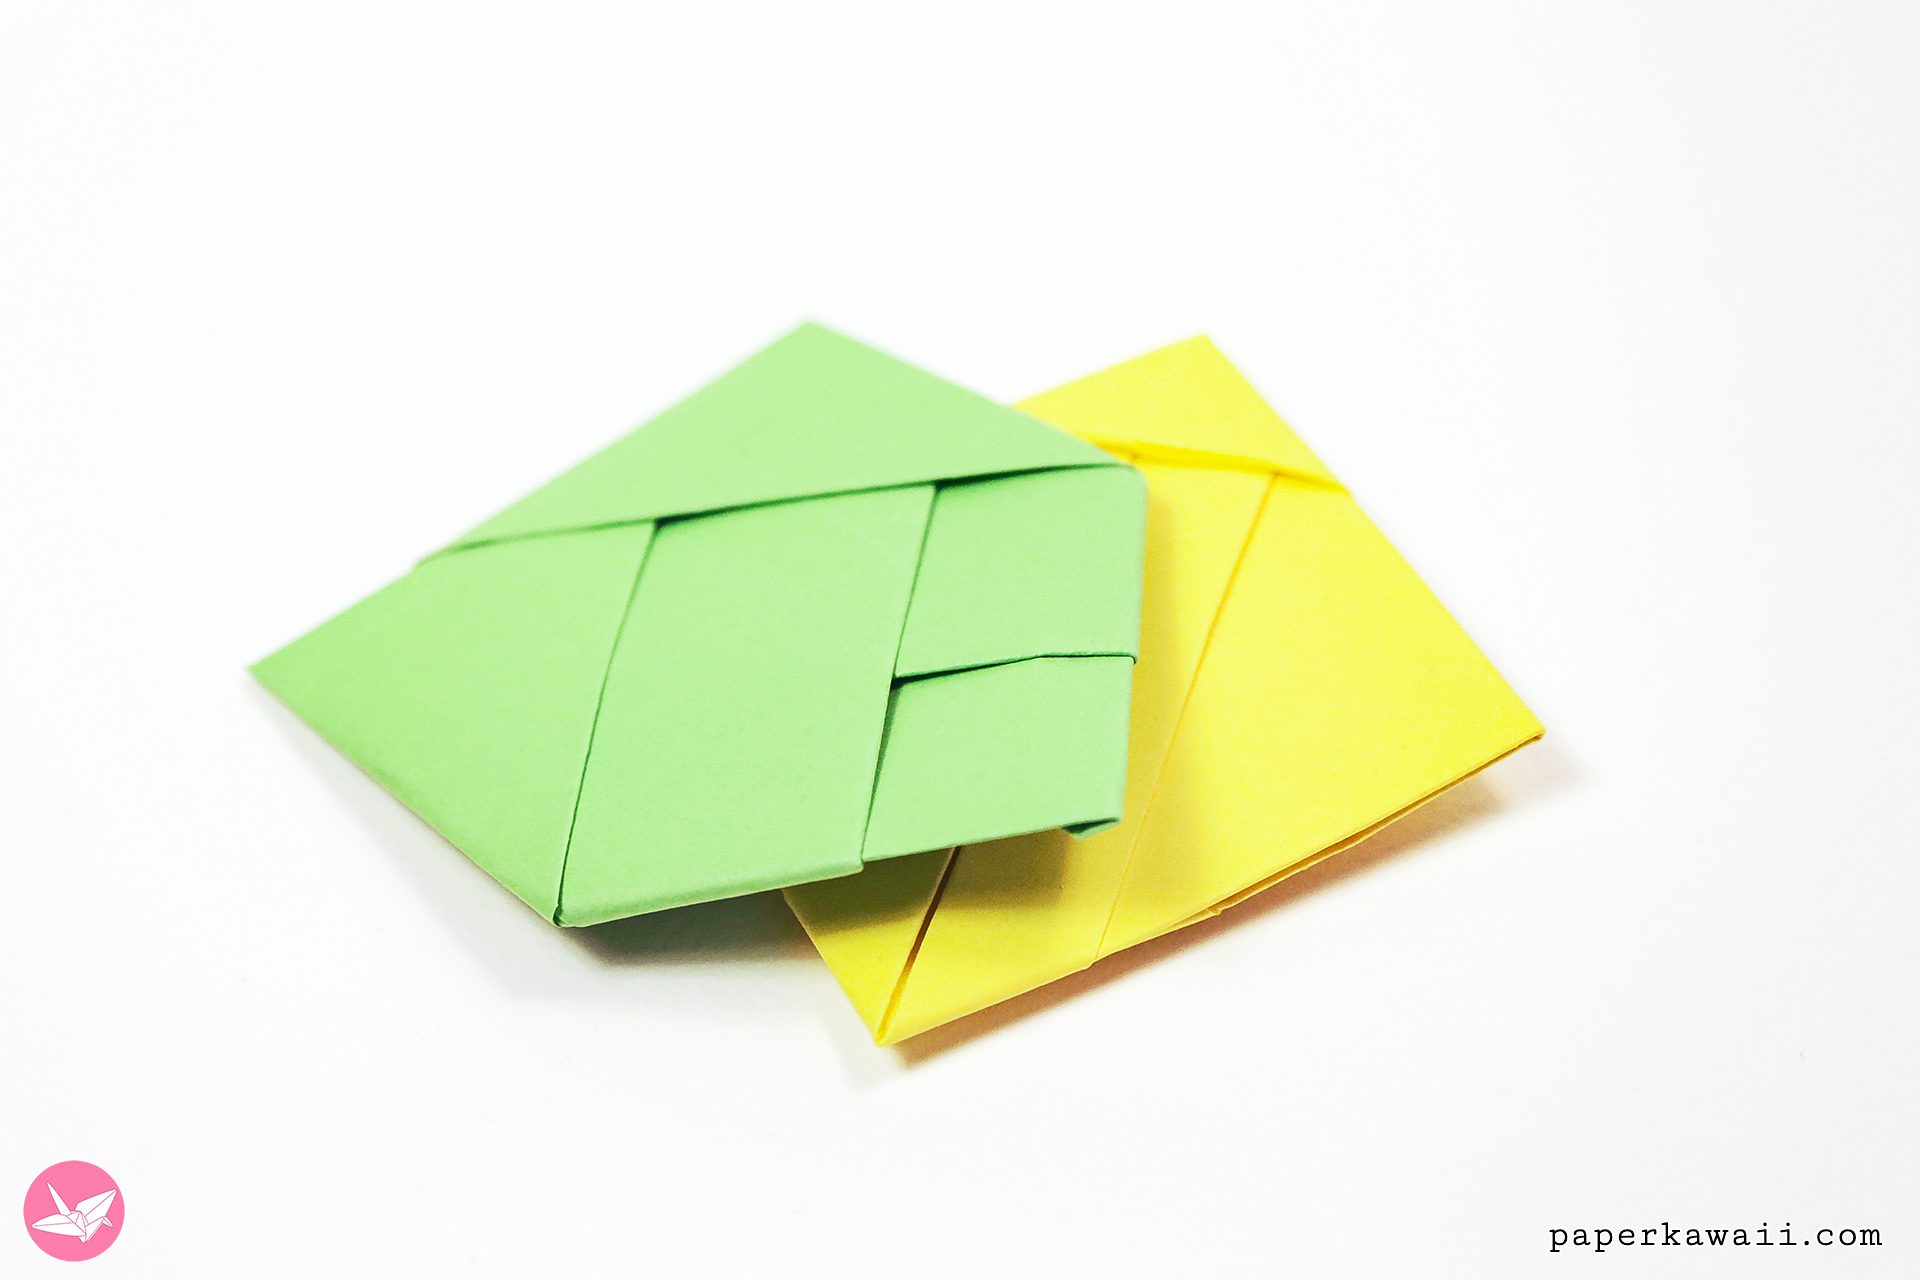 Make an Origami Hexagonal Letterfold Using A4 Paper